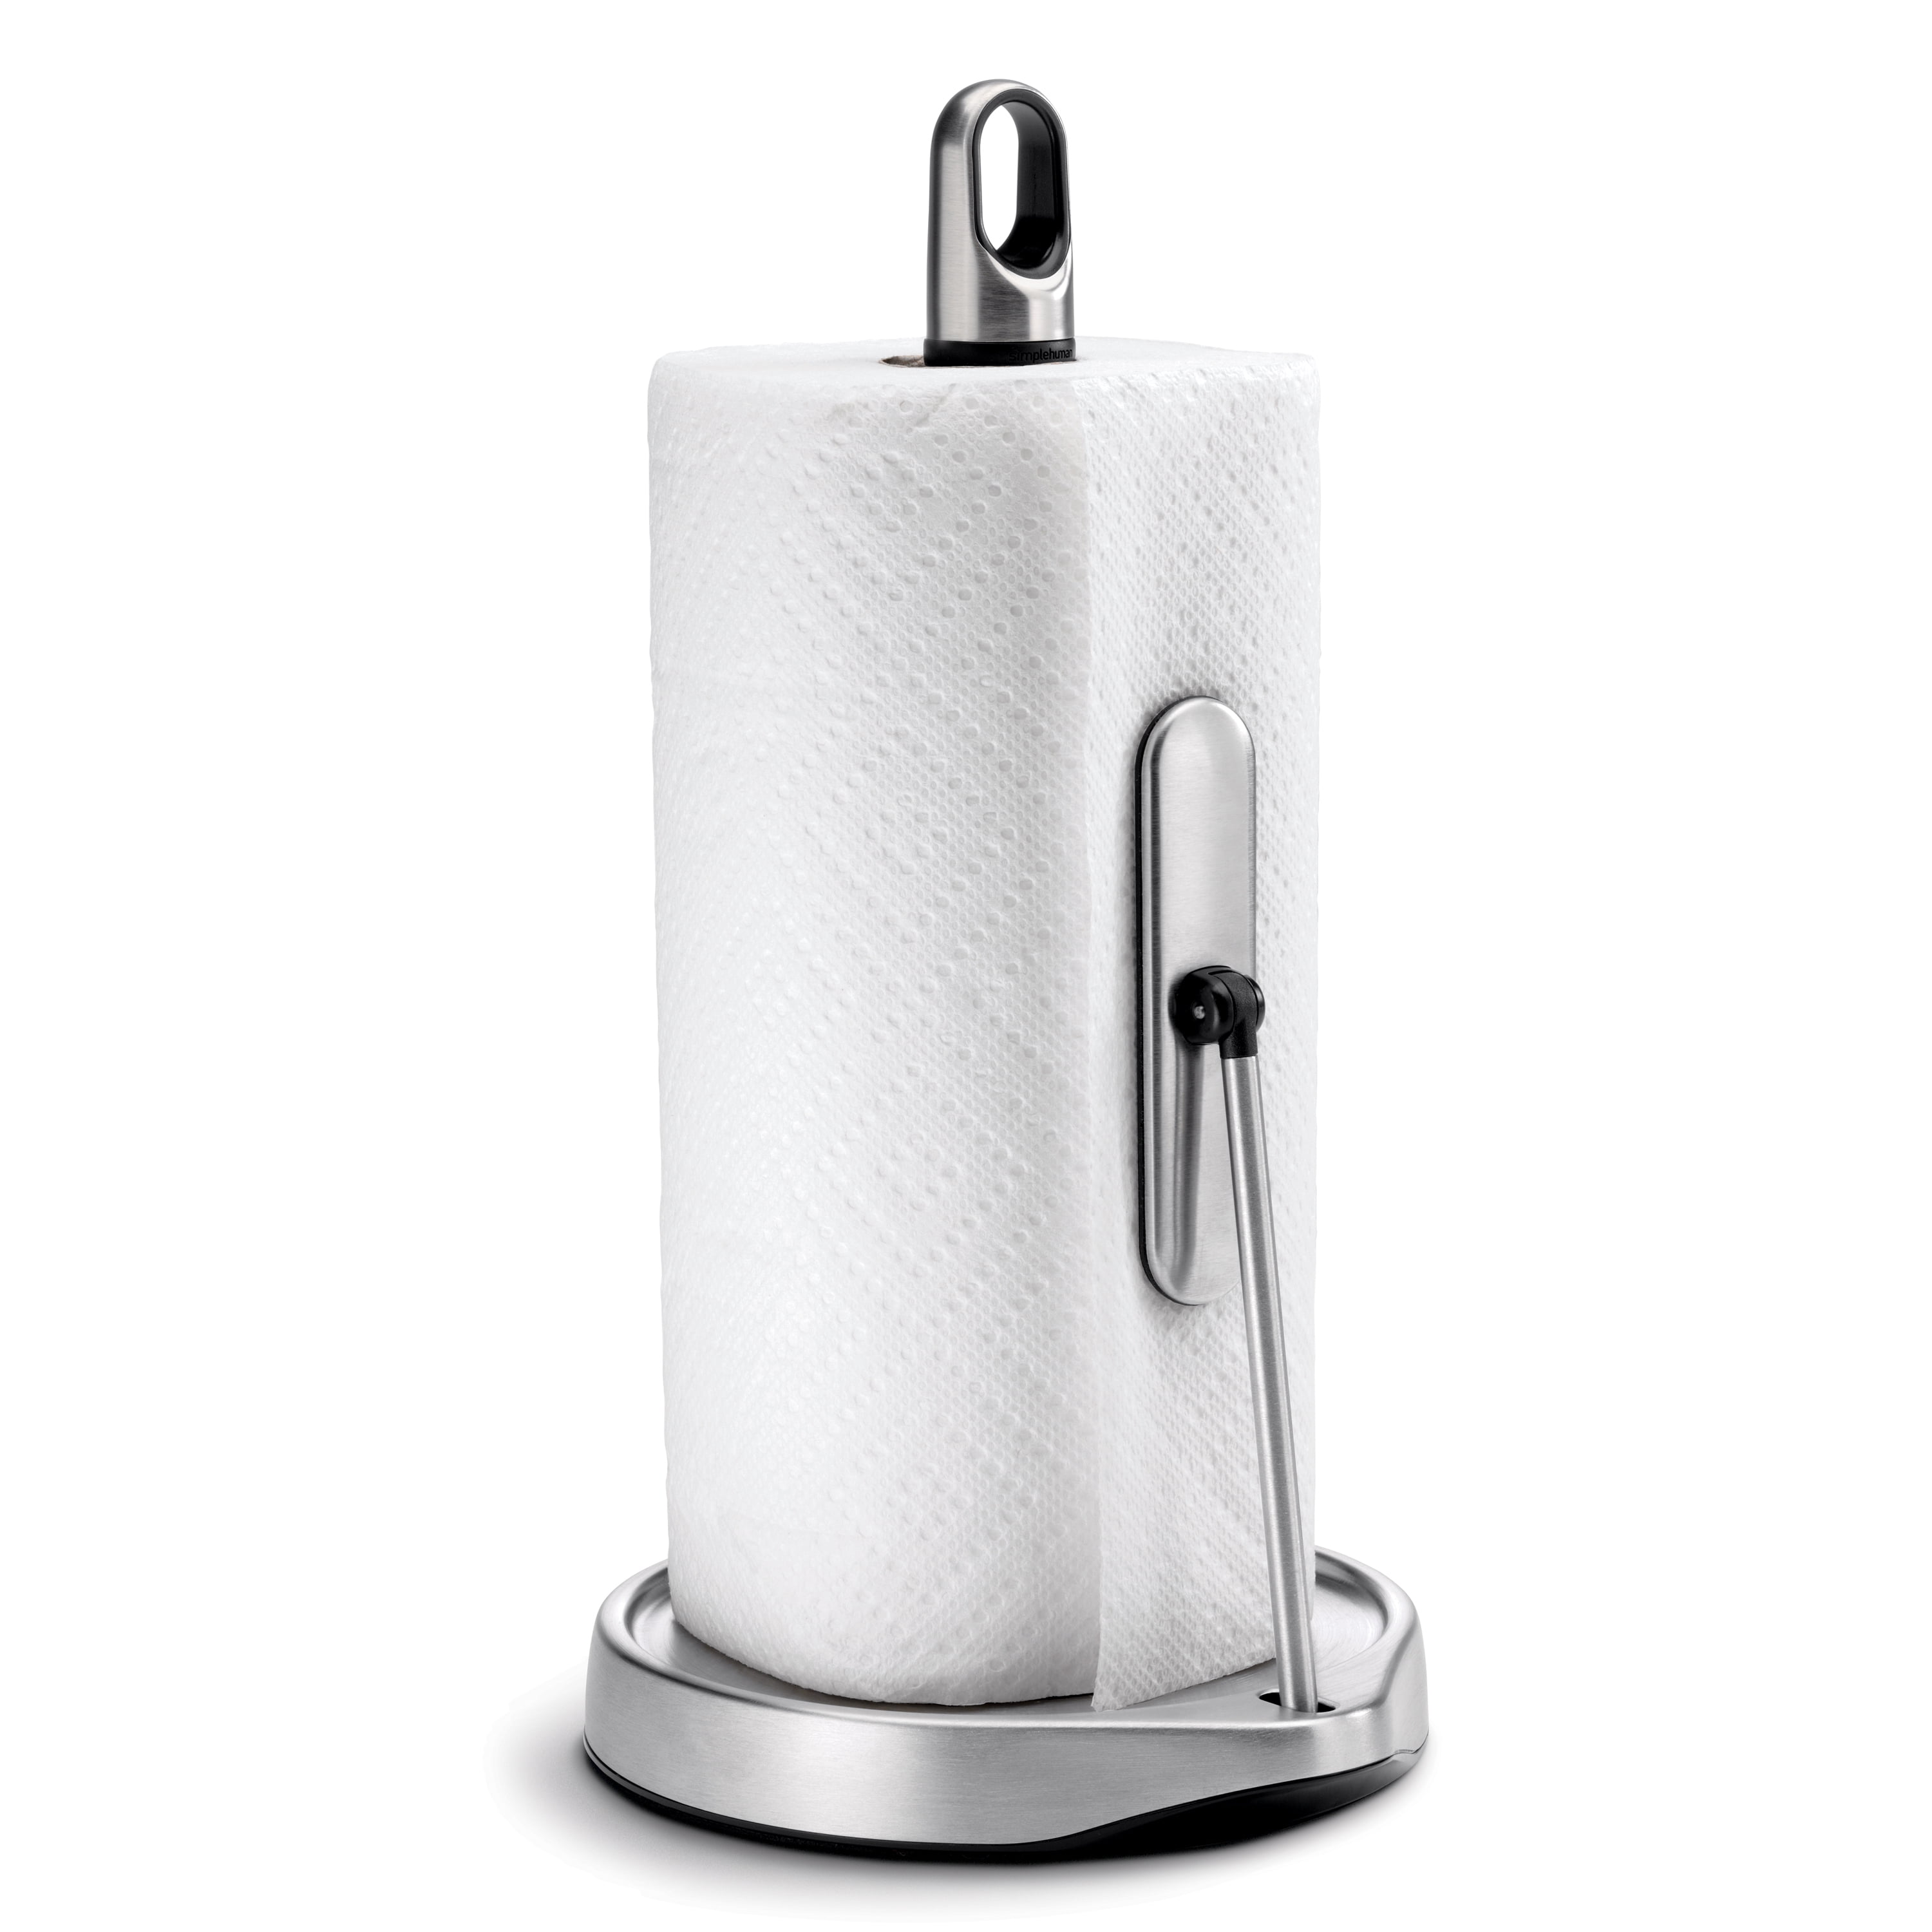 simplehuman Stainless Steel Wall Mount Paper Towel Holder